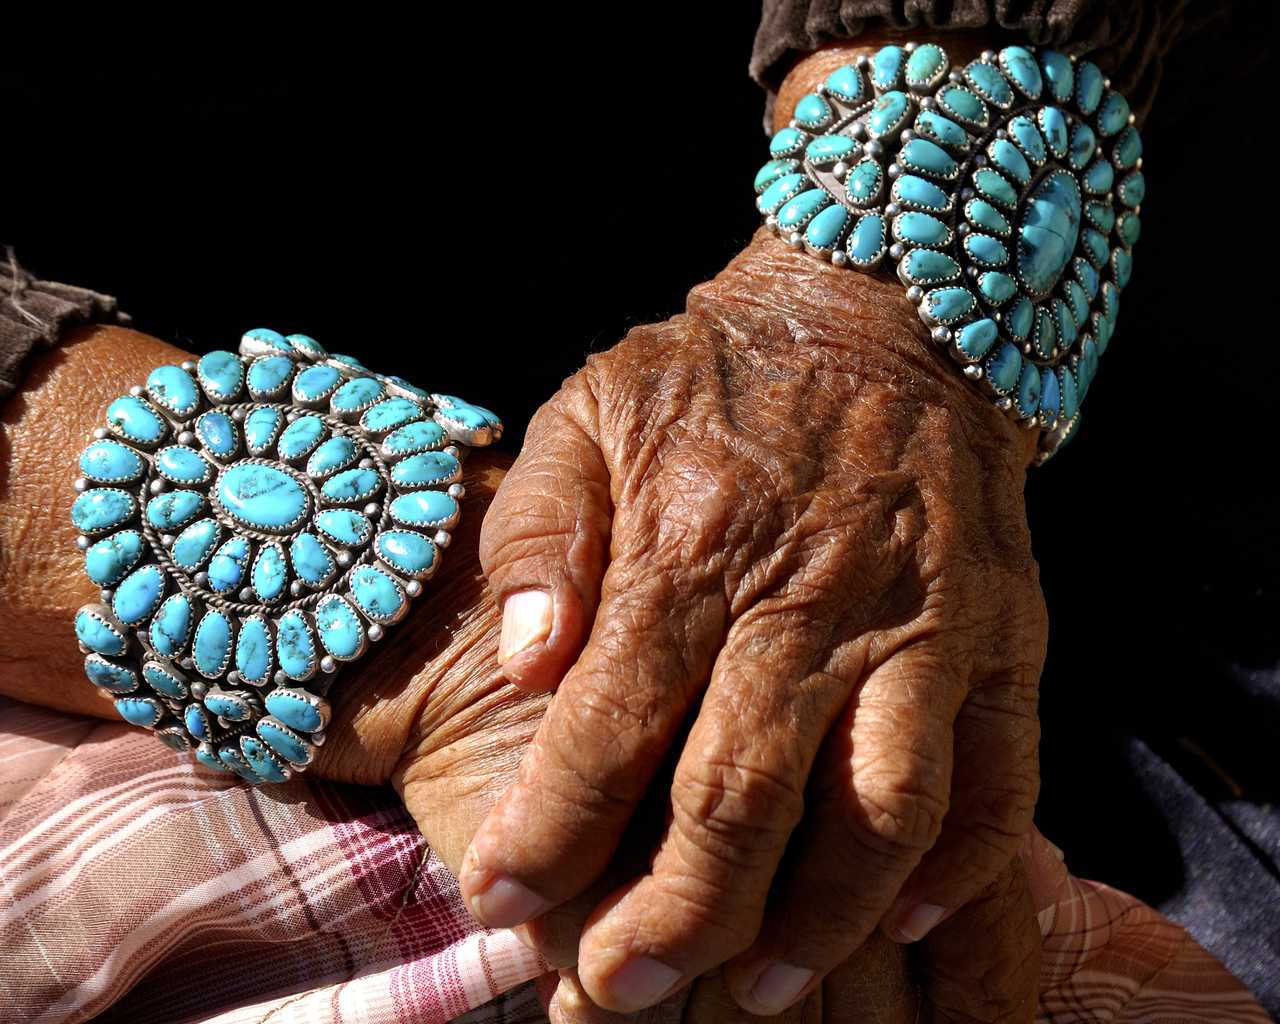 What Is The Use Of Gemstones In Native American Culture And Tradition?